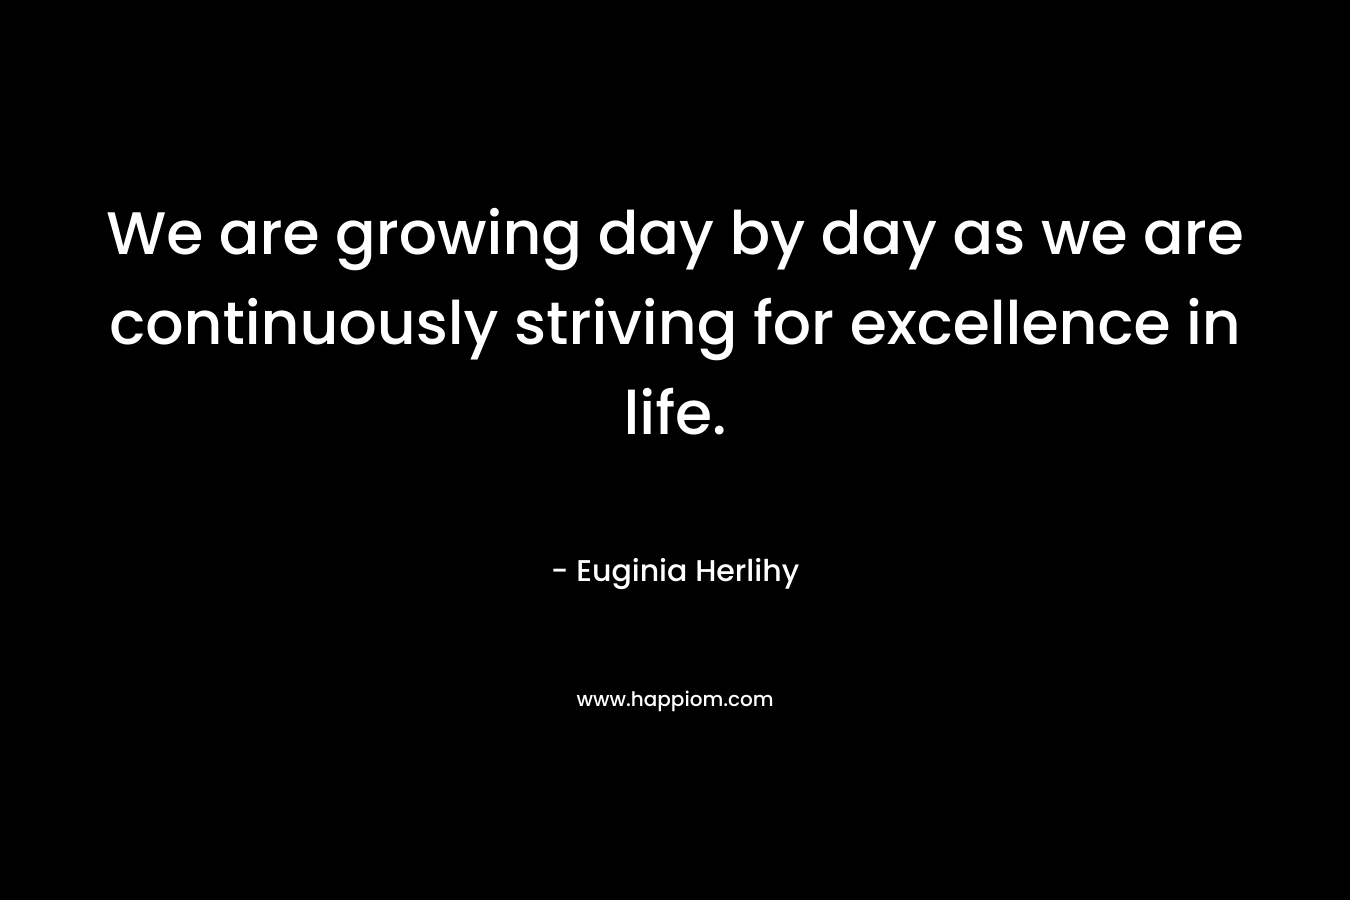 We are growing day by day as we are continuously striving for excellence in life.